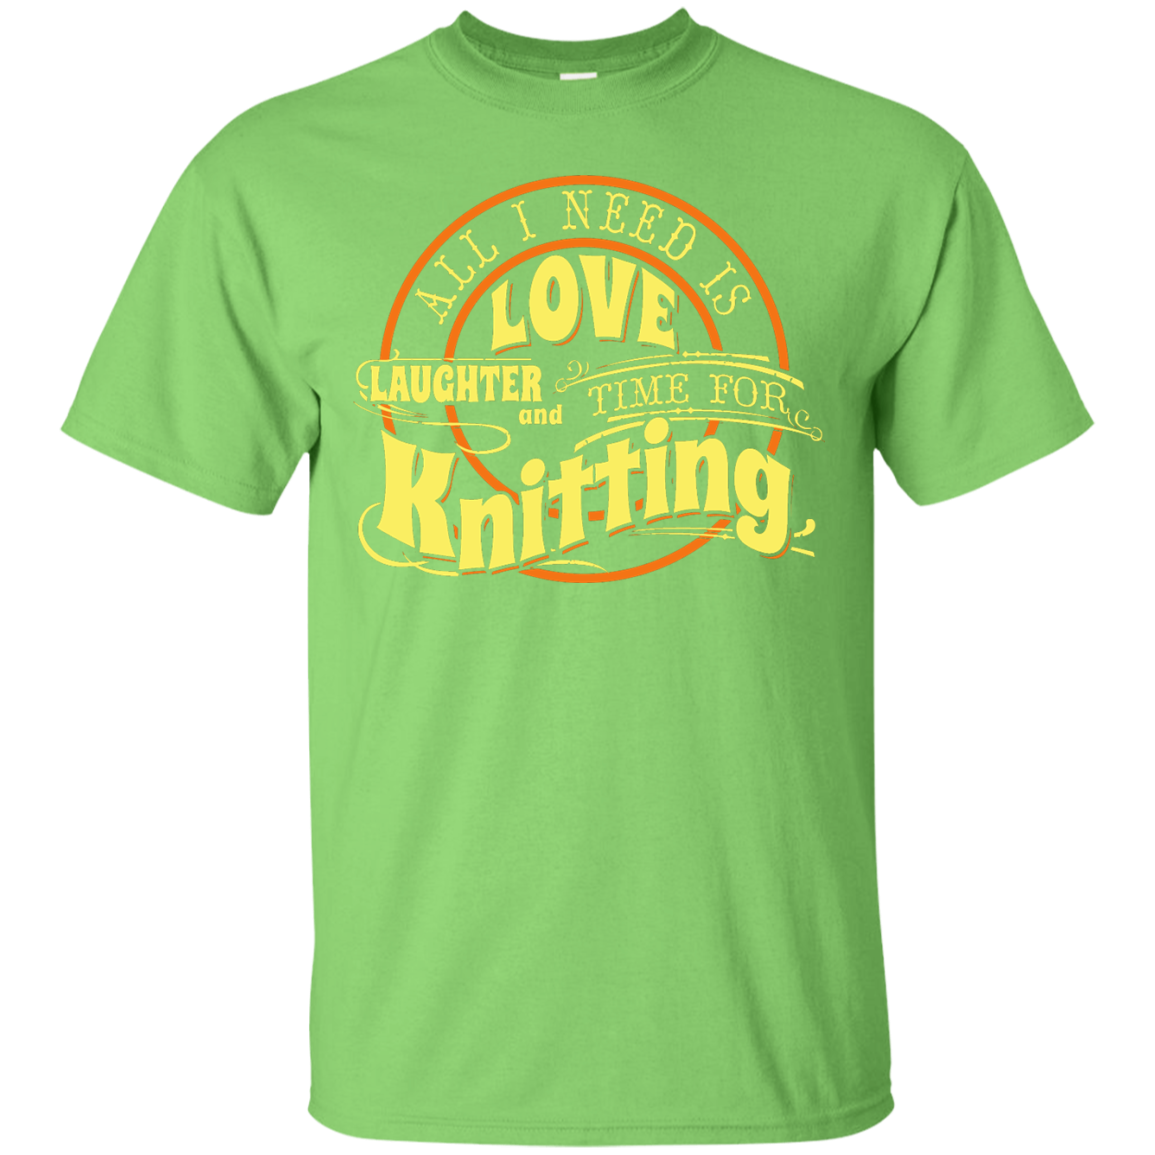 Time for Knitting (yellow) Custom Ultra Cotton T-Shirt - Crafter4Life - 5